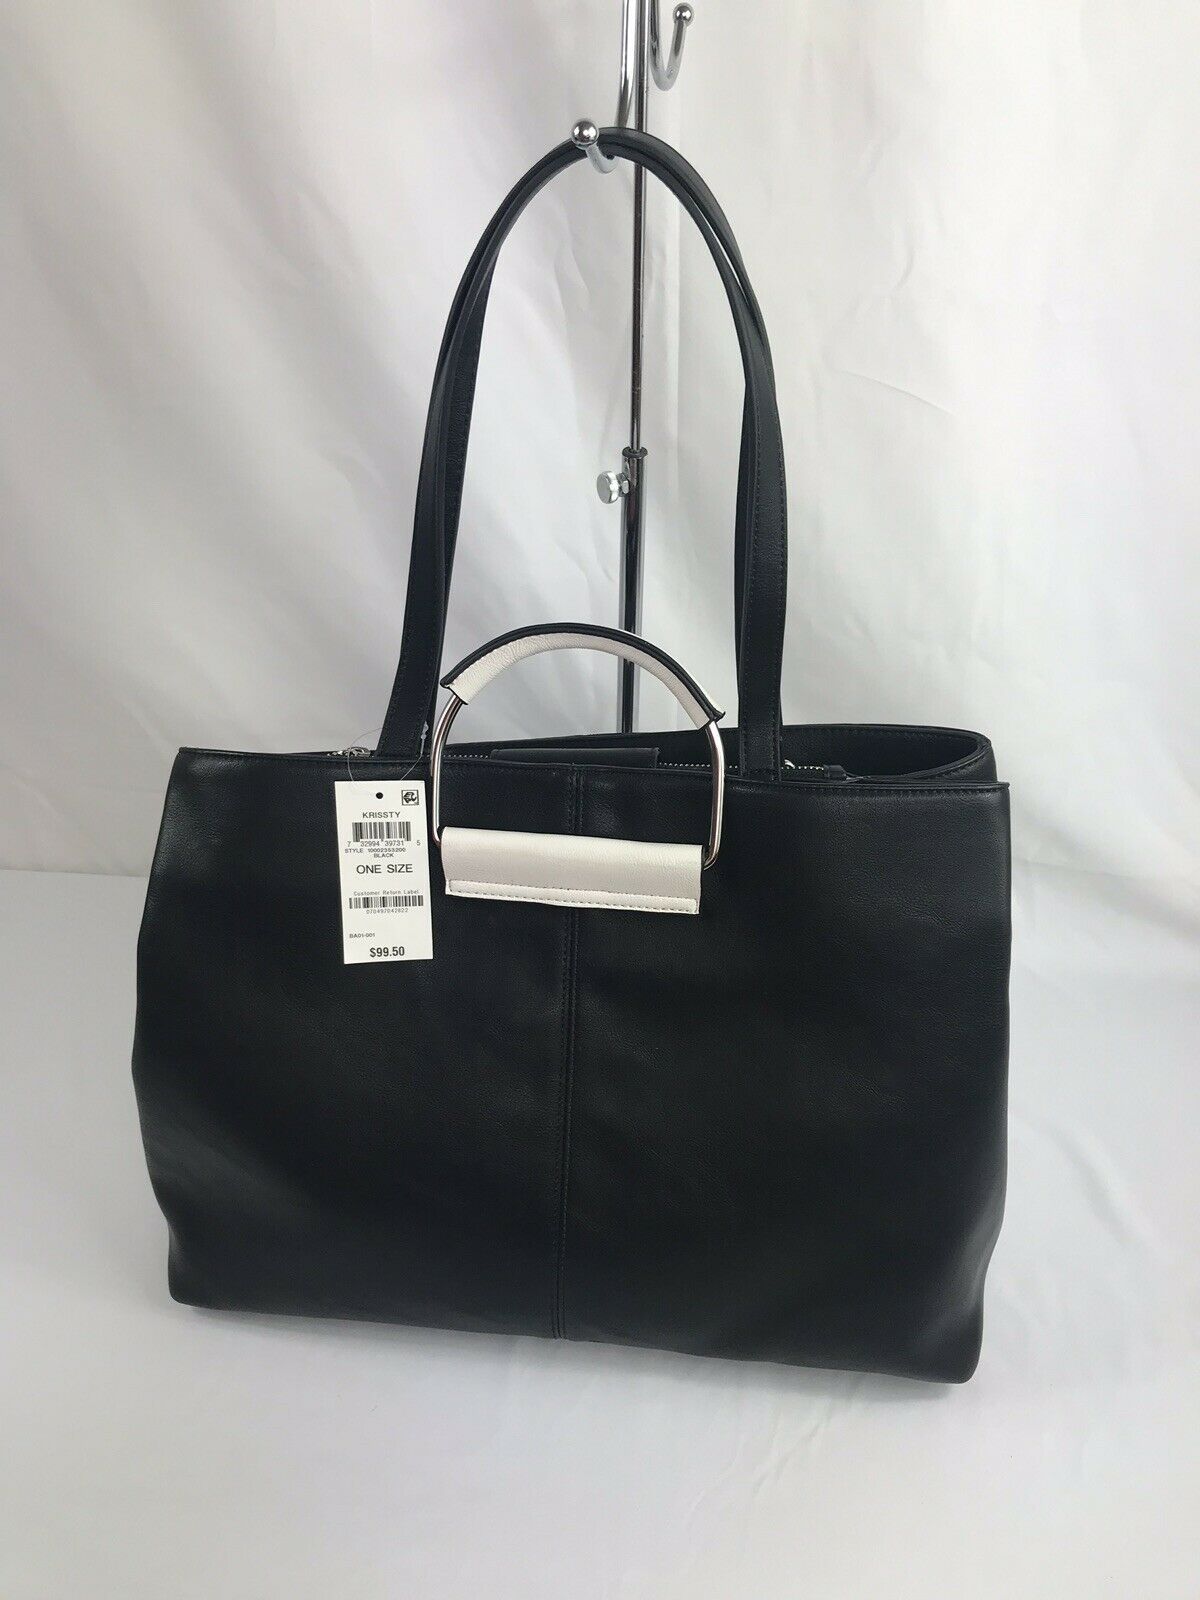 INC International Concepts Krissysty Tote Black ($99.50) - Outlet Designers